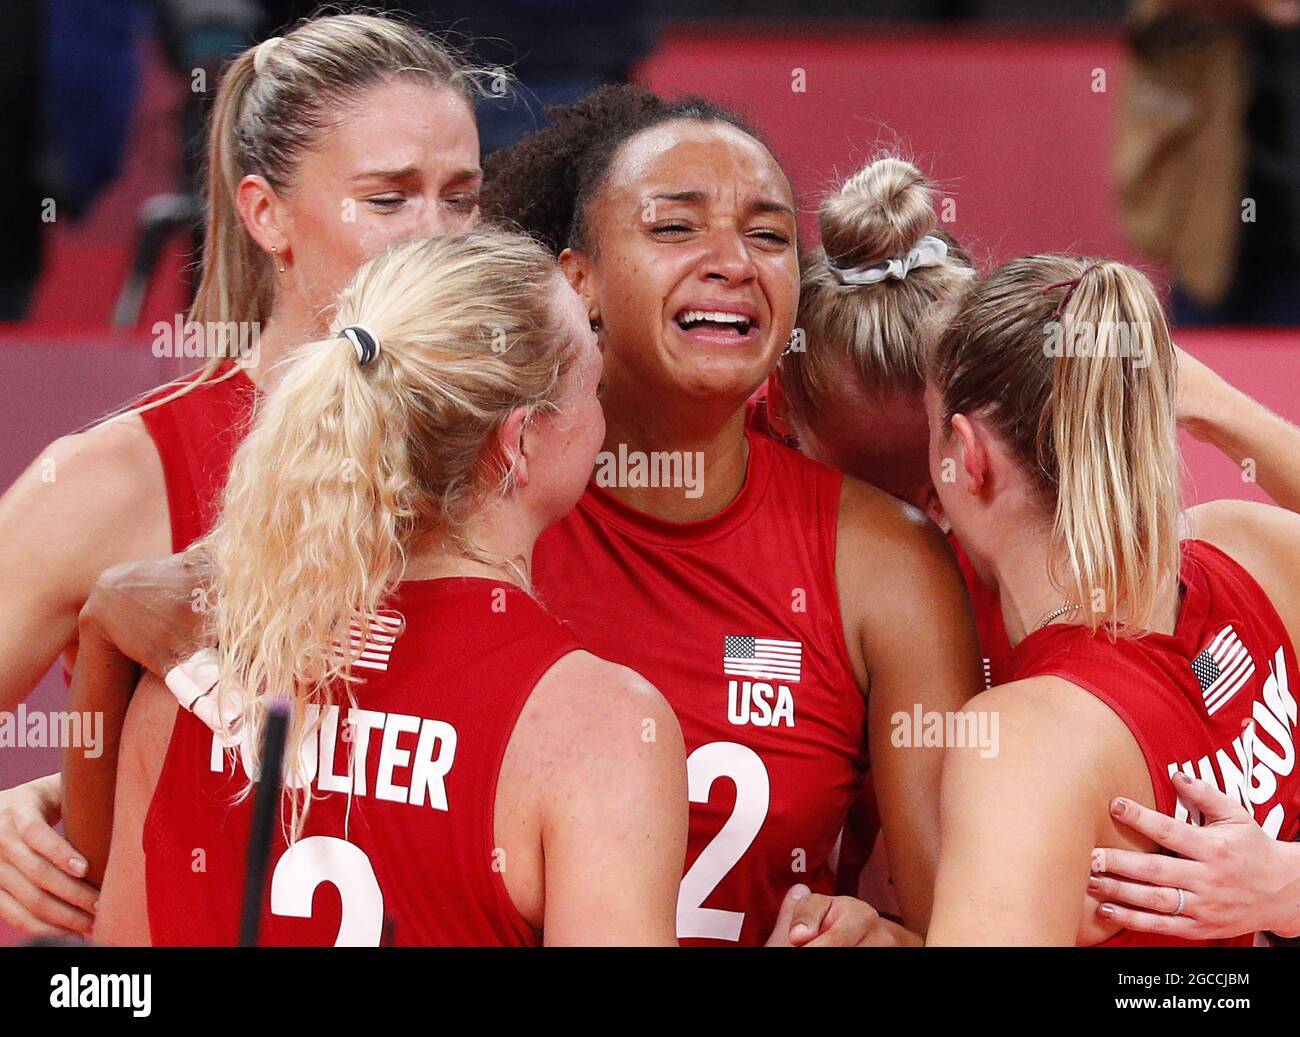 Tokyo, Japan. 08th Aug, 2021. The USA team celebrates after defeating Brazil in straight sets, 25-21, 25-20 and 25-14 to win the gold medal in Women's Volleyball at the Tokyo Summer Olympics in Tokyo, Japan, on Sunday, August 8, 2021. Photo by Bob Strong/UPI. Credit: UPI/Alamy Live News Stock Photo